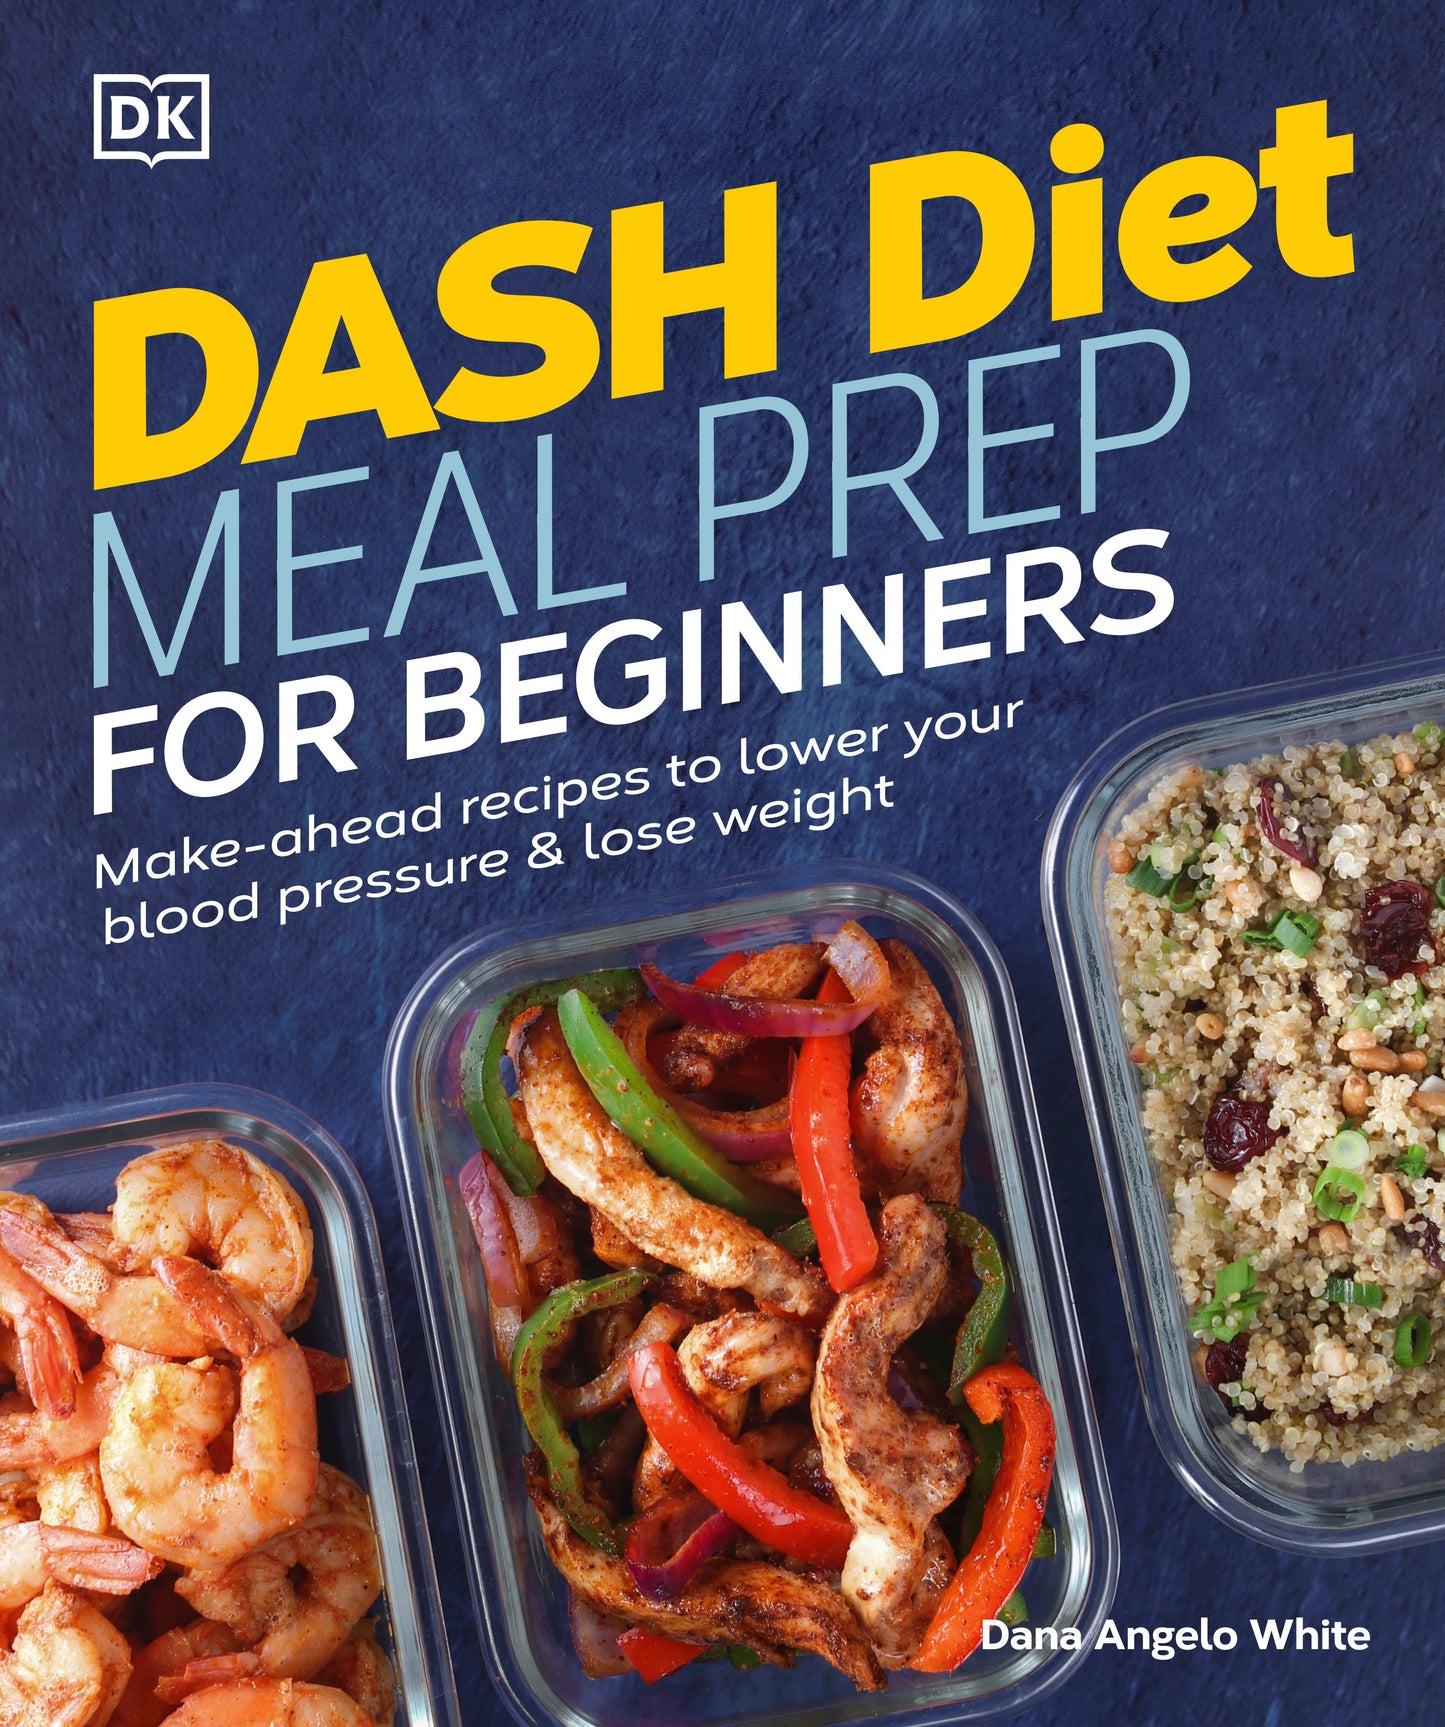 Dash Diet Meal Prep for Beginners